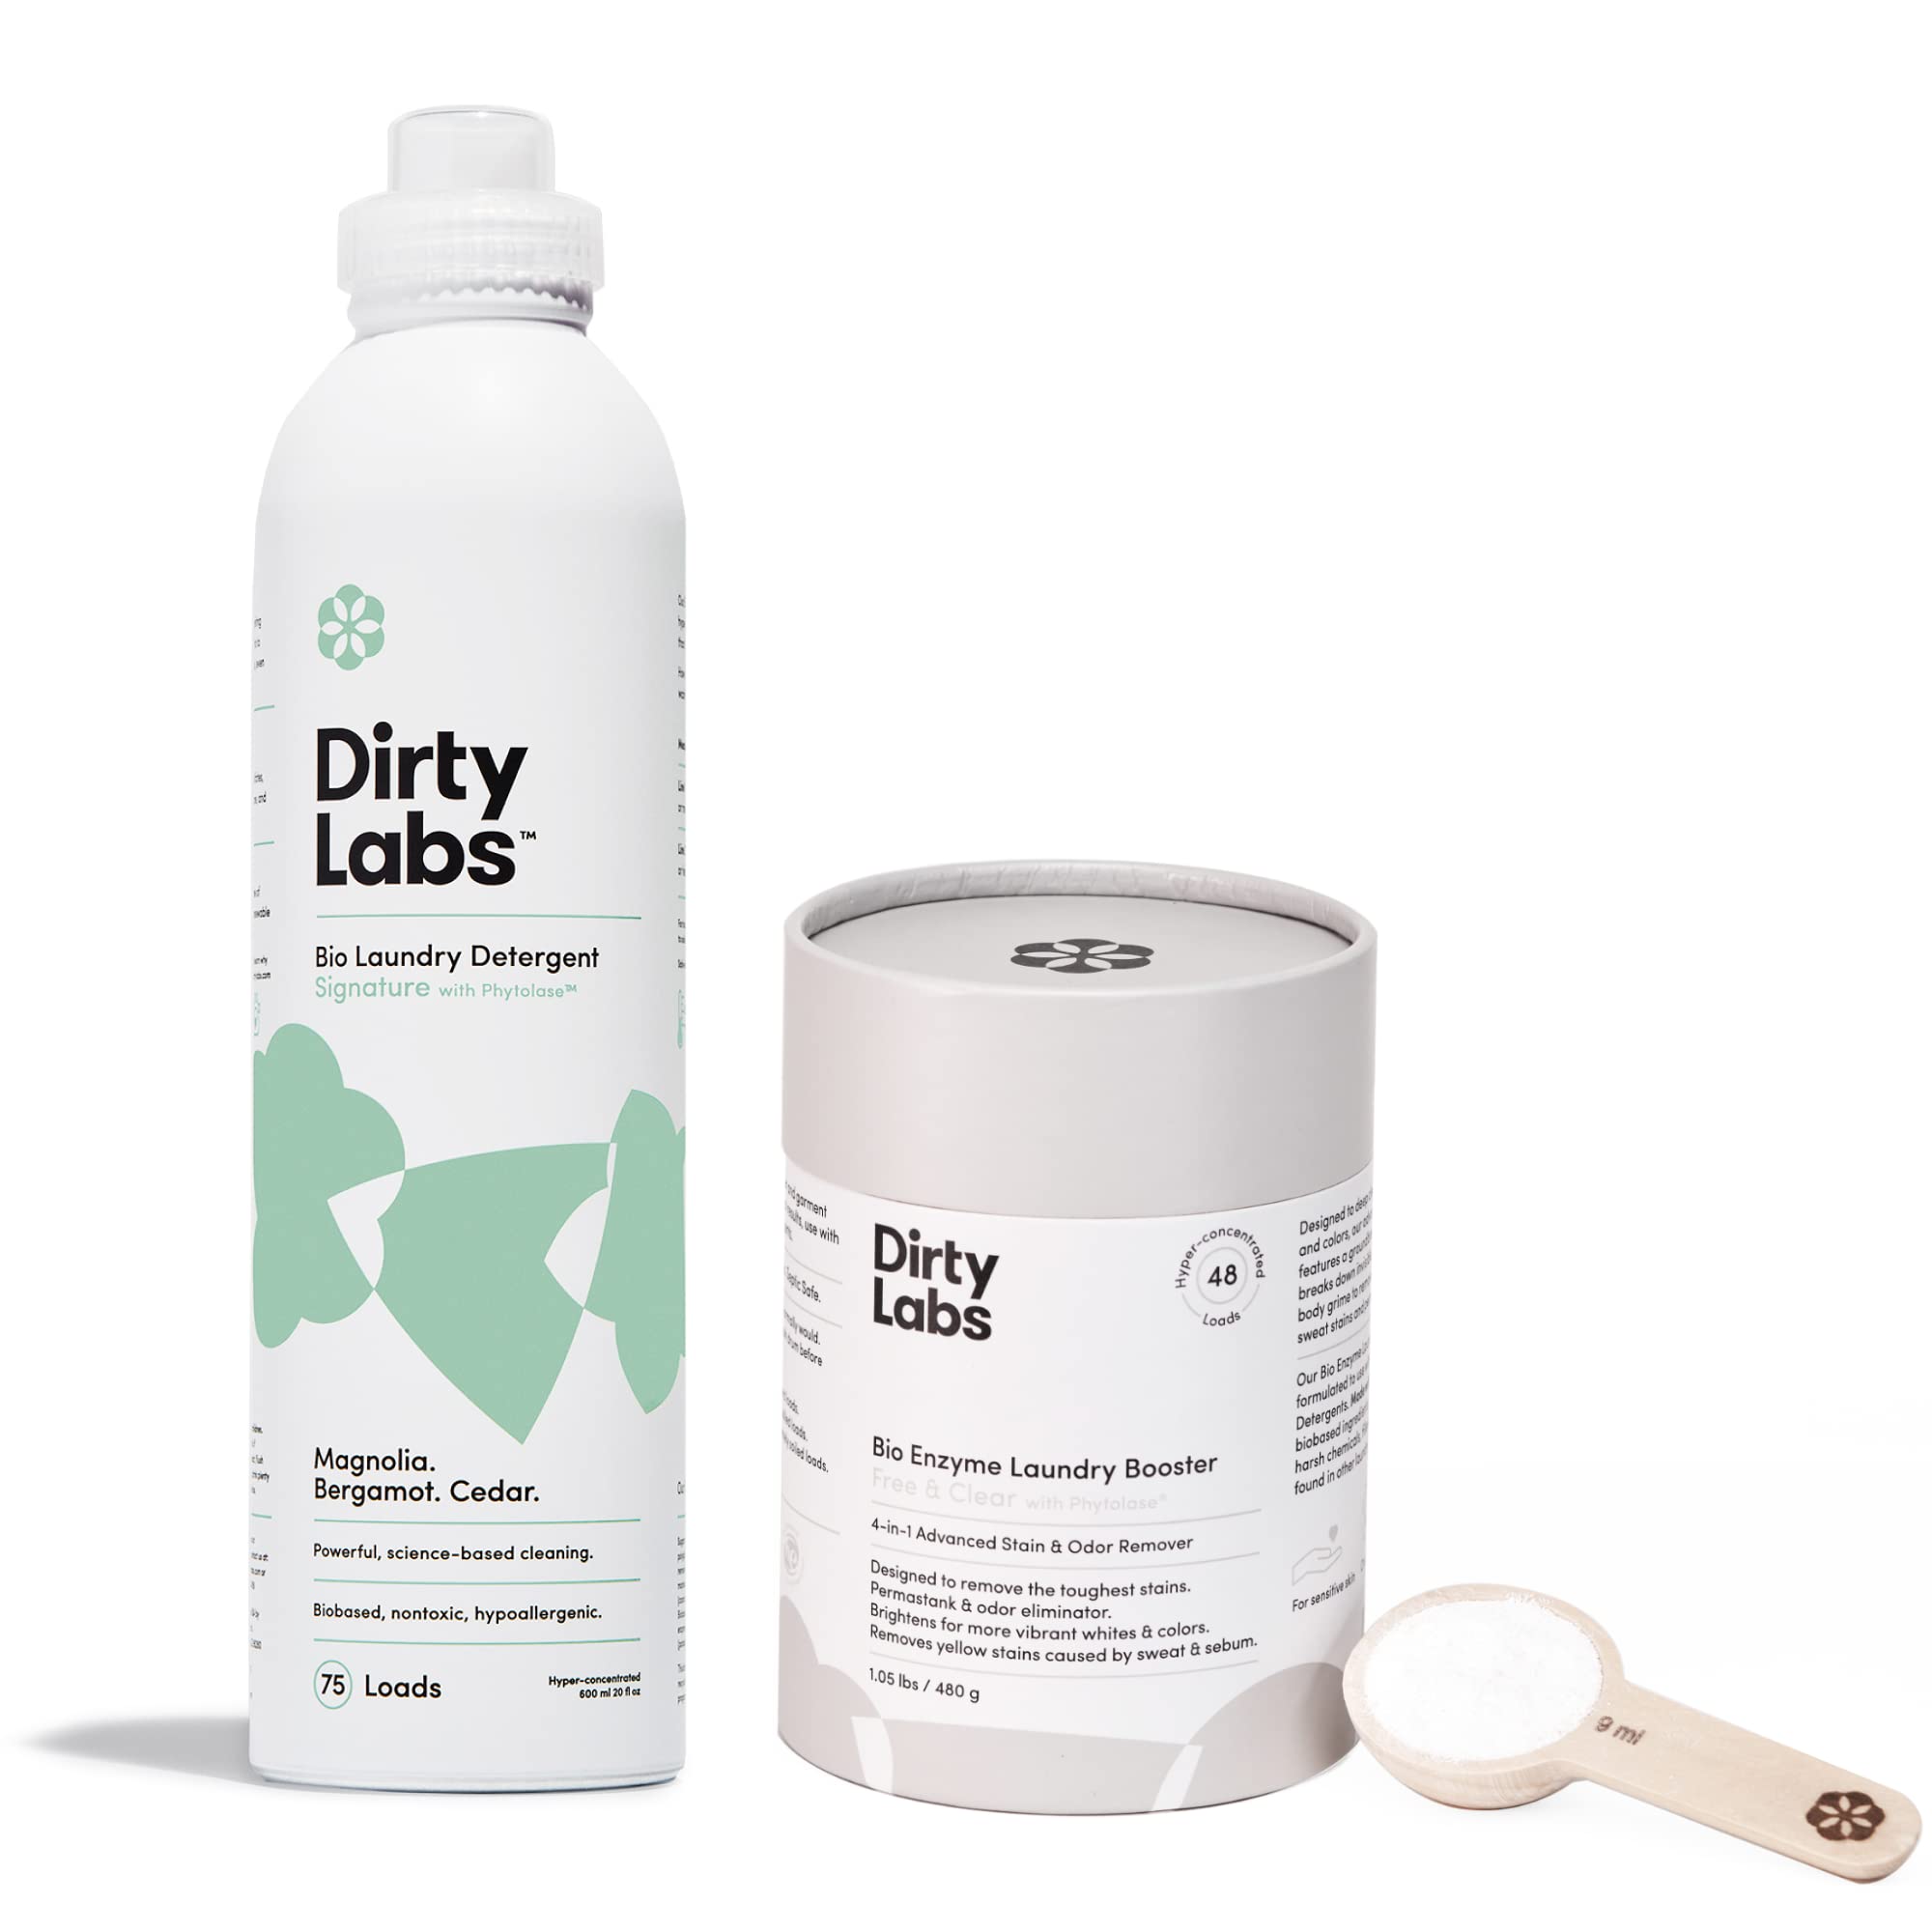 Dirty Labs Bio Laundry Detergent Duo